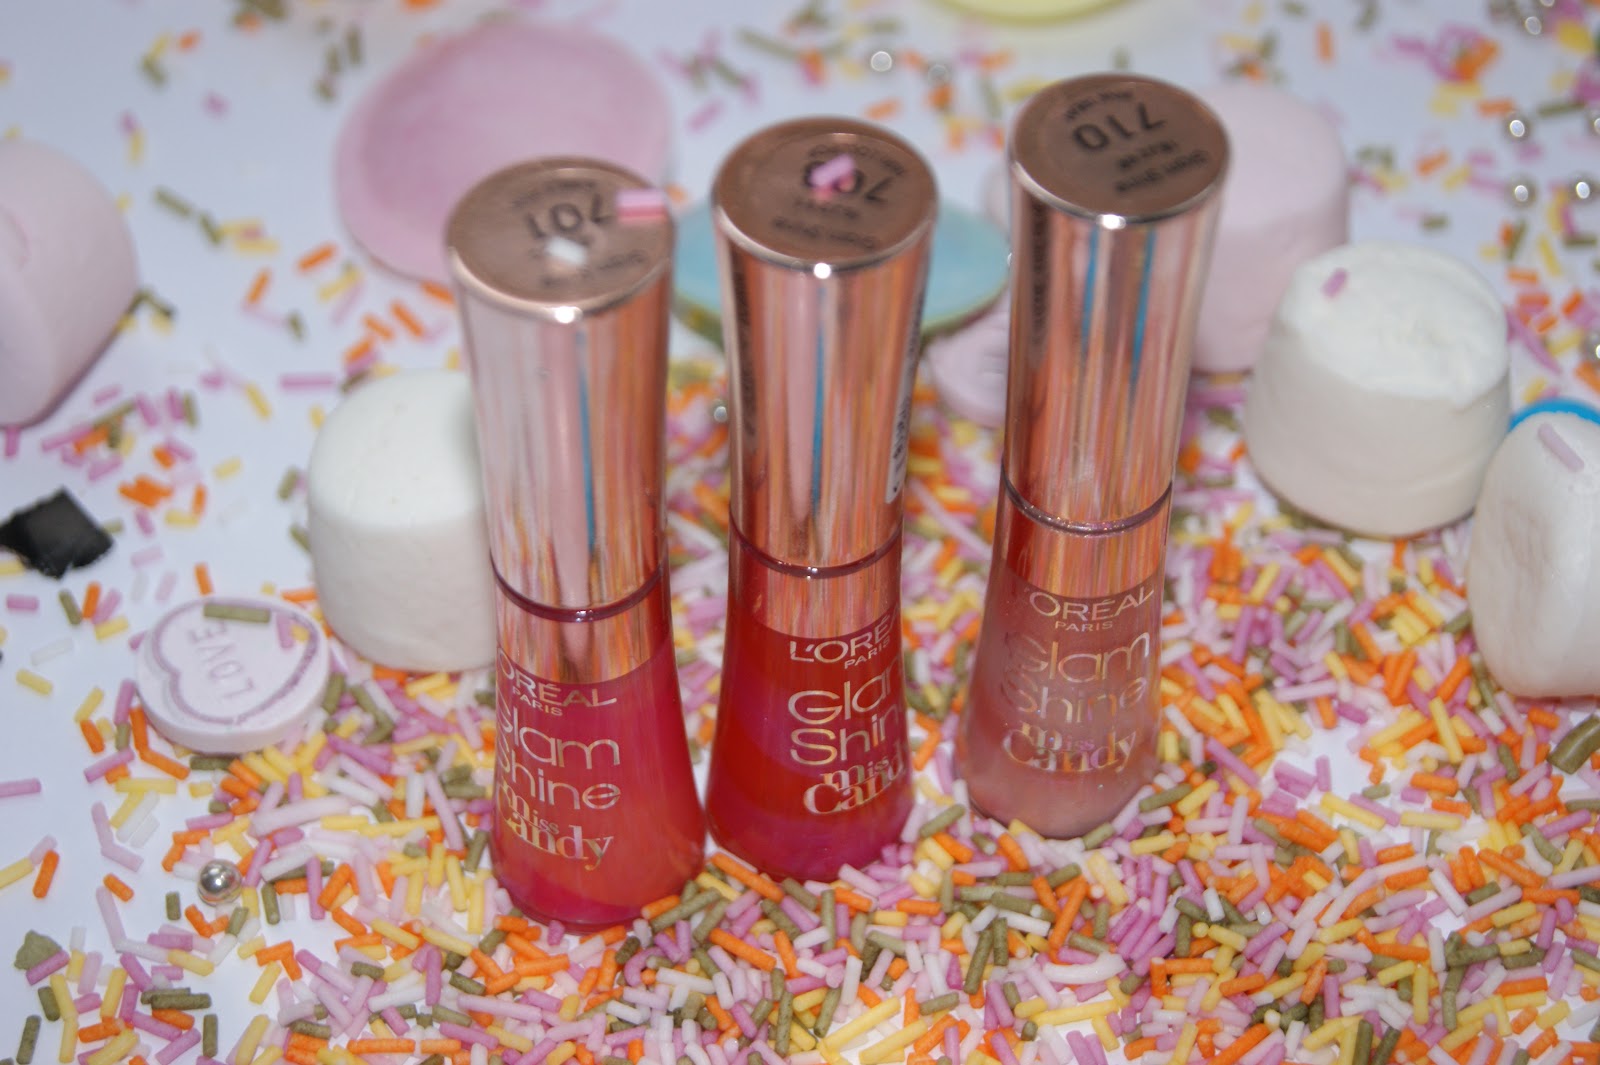 L'Oreal Miss Candy Glam Shine Lip Glosses Part 2 - Review